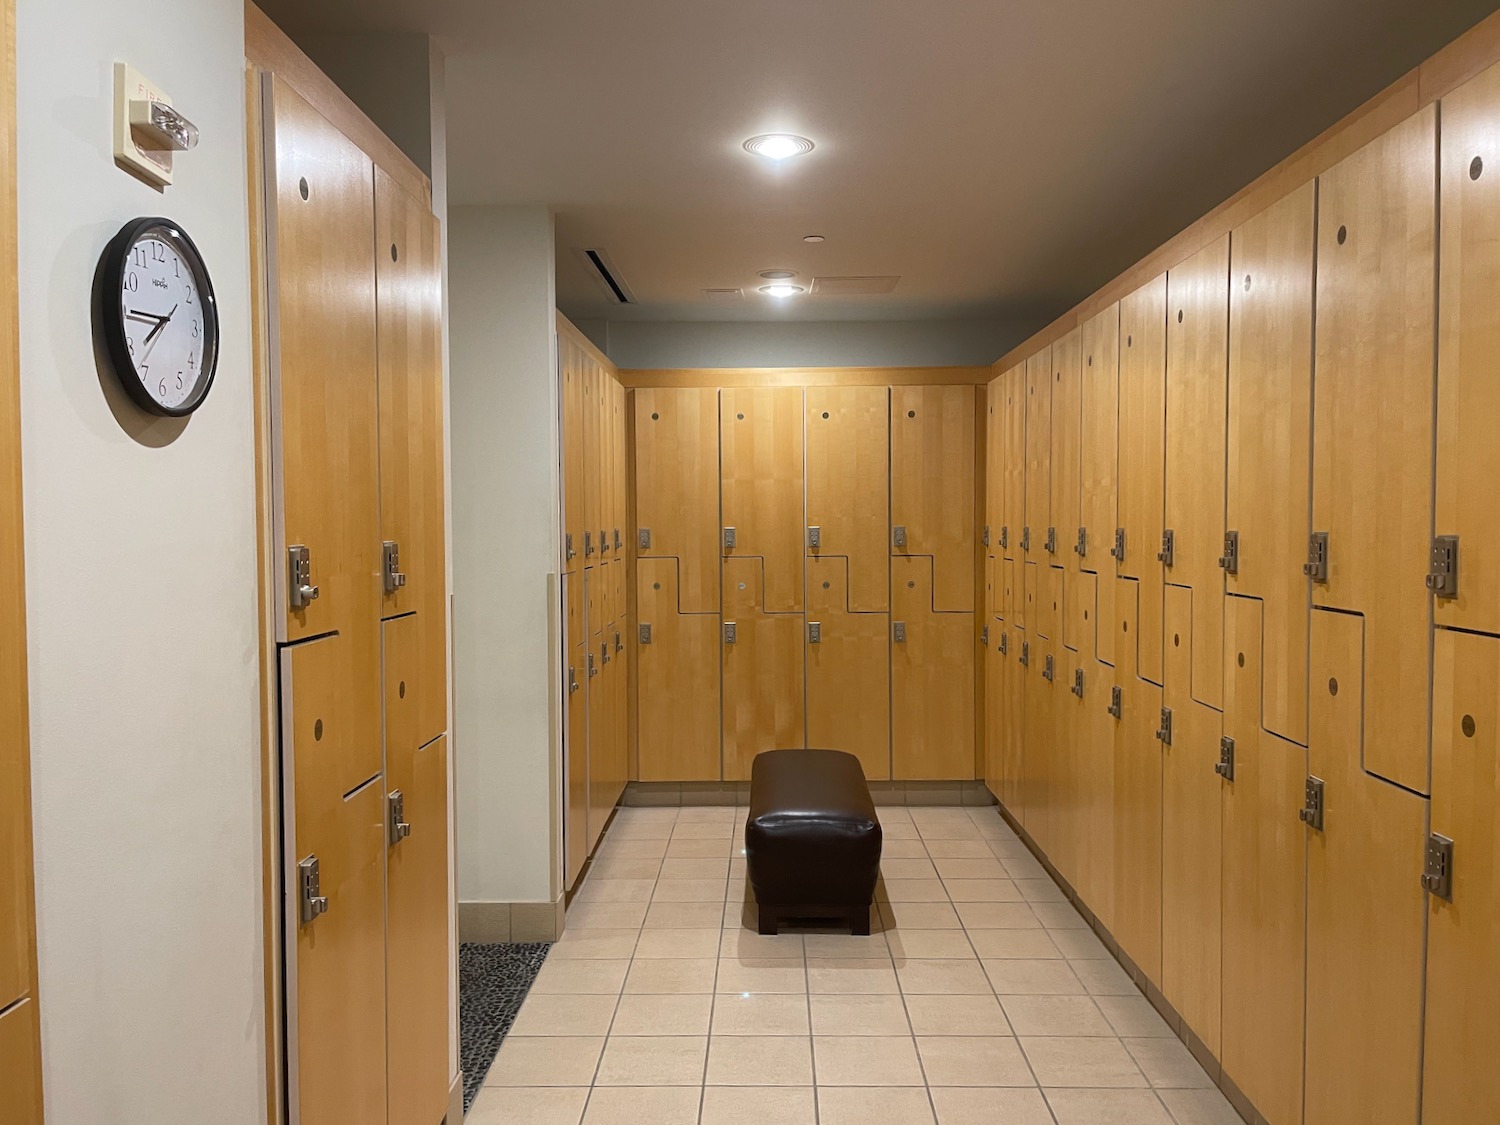 a locker room with a bench and many lockers